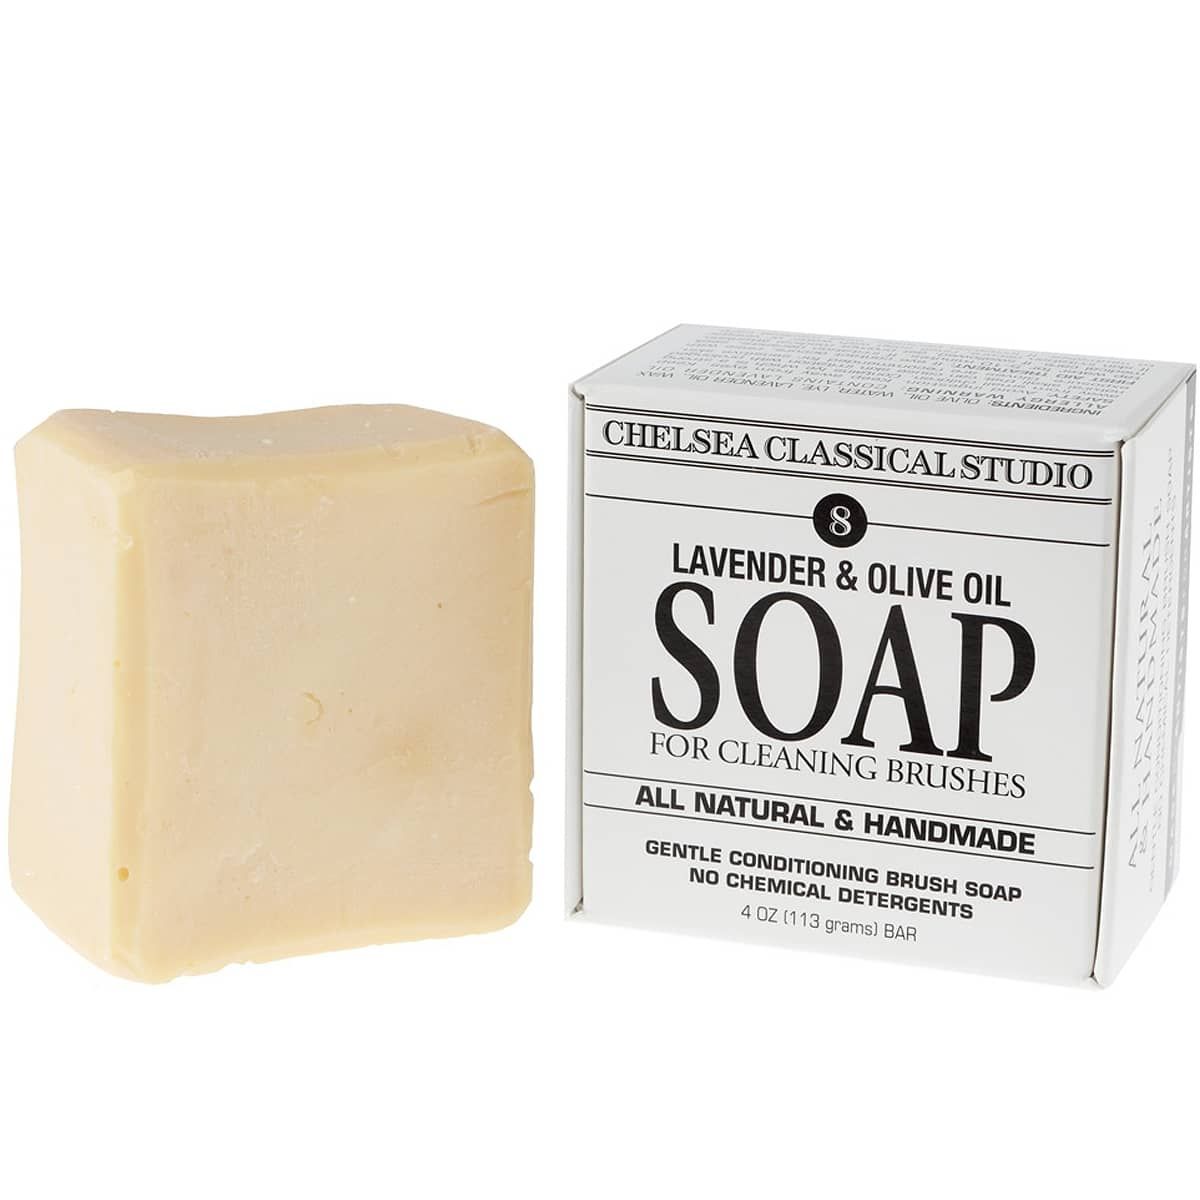 All-Natural, Handmade Soap To Clean & Condition Brushes